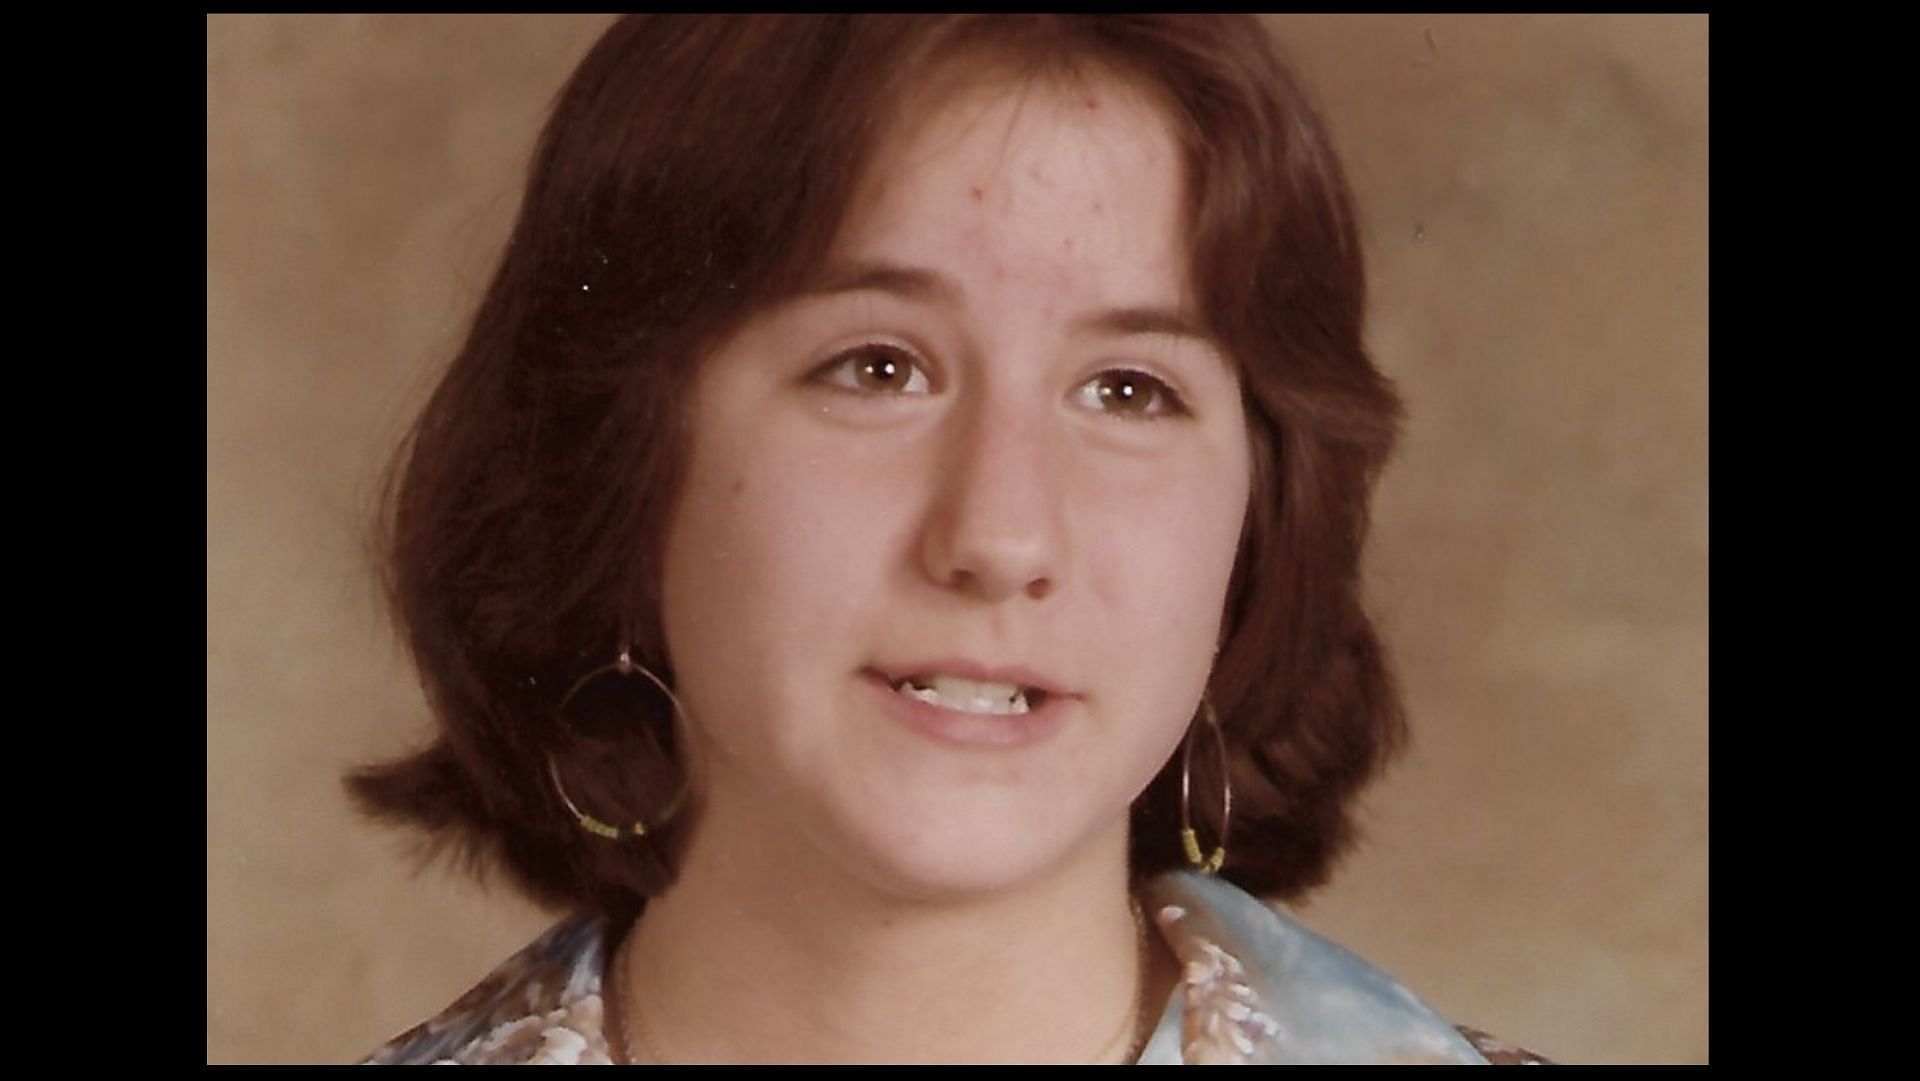 The case explored as the remains of the missing teen are found at the killer&#039;s home after more than 40 years (Image via Twitter/TimWronka)